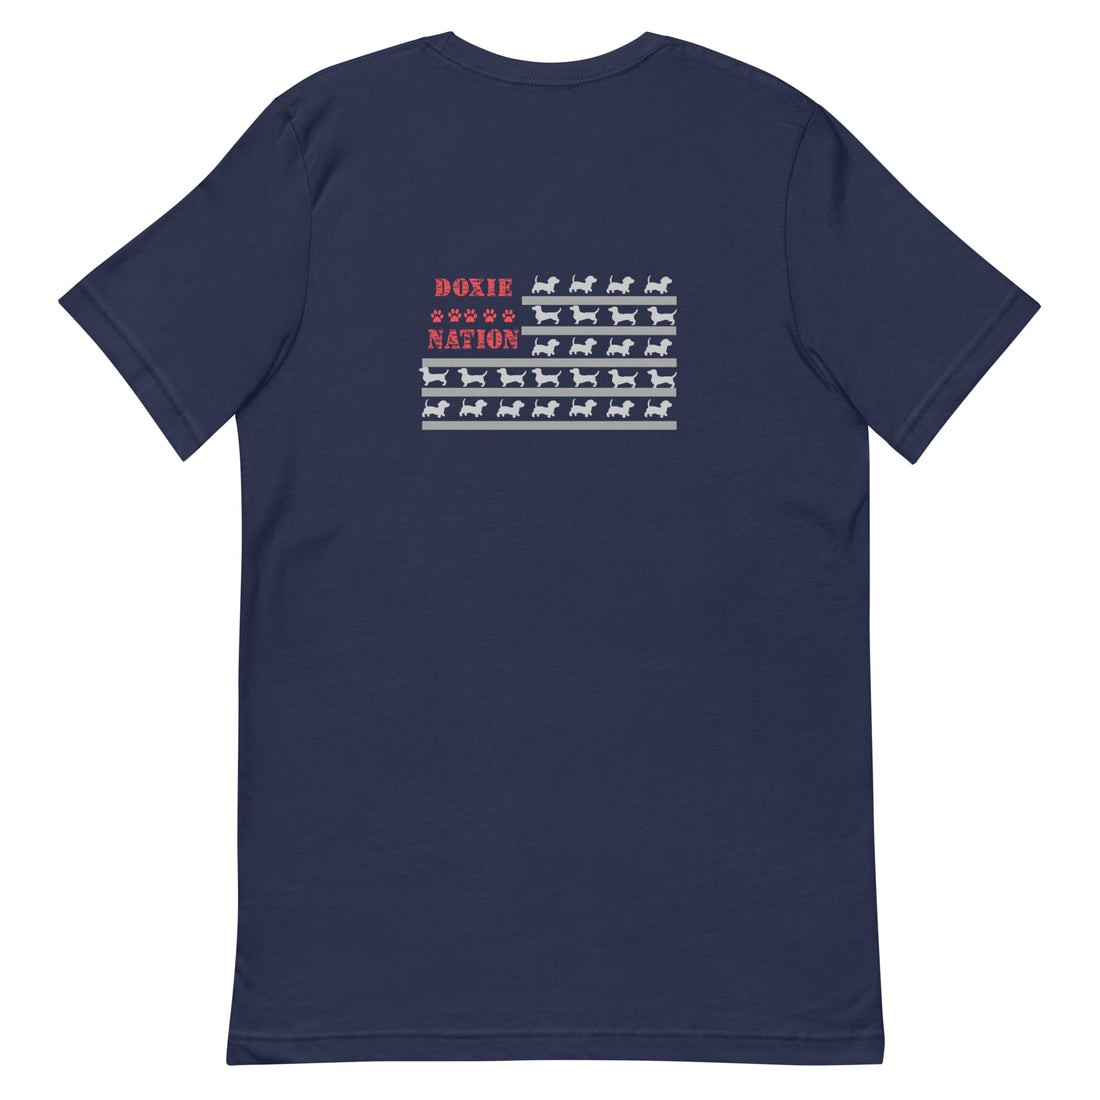 Navy unisex 100% cotton t-shirt with Doxie Nation flag